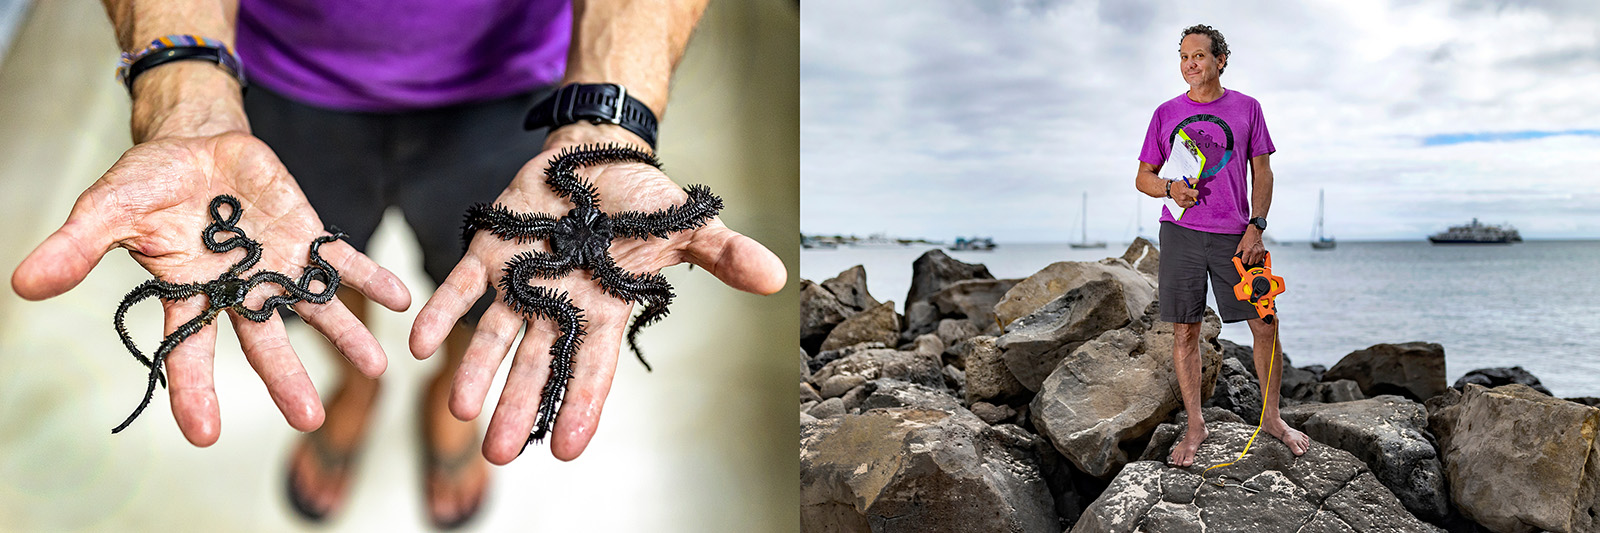 A man standing on a rock by the ocean, and a hand holding a brittle star.